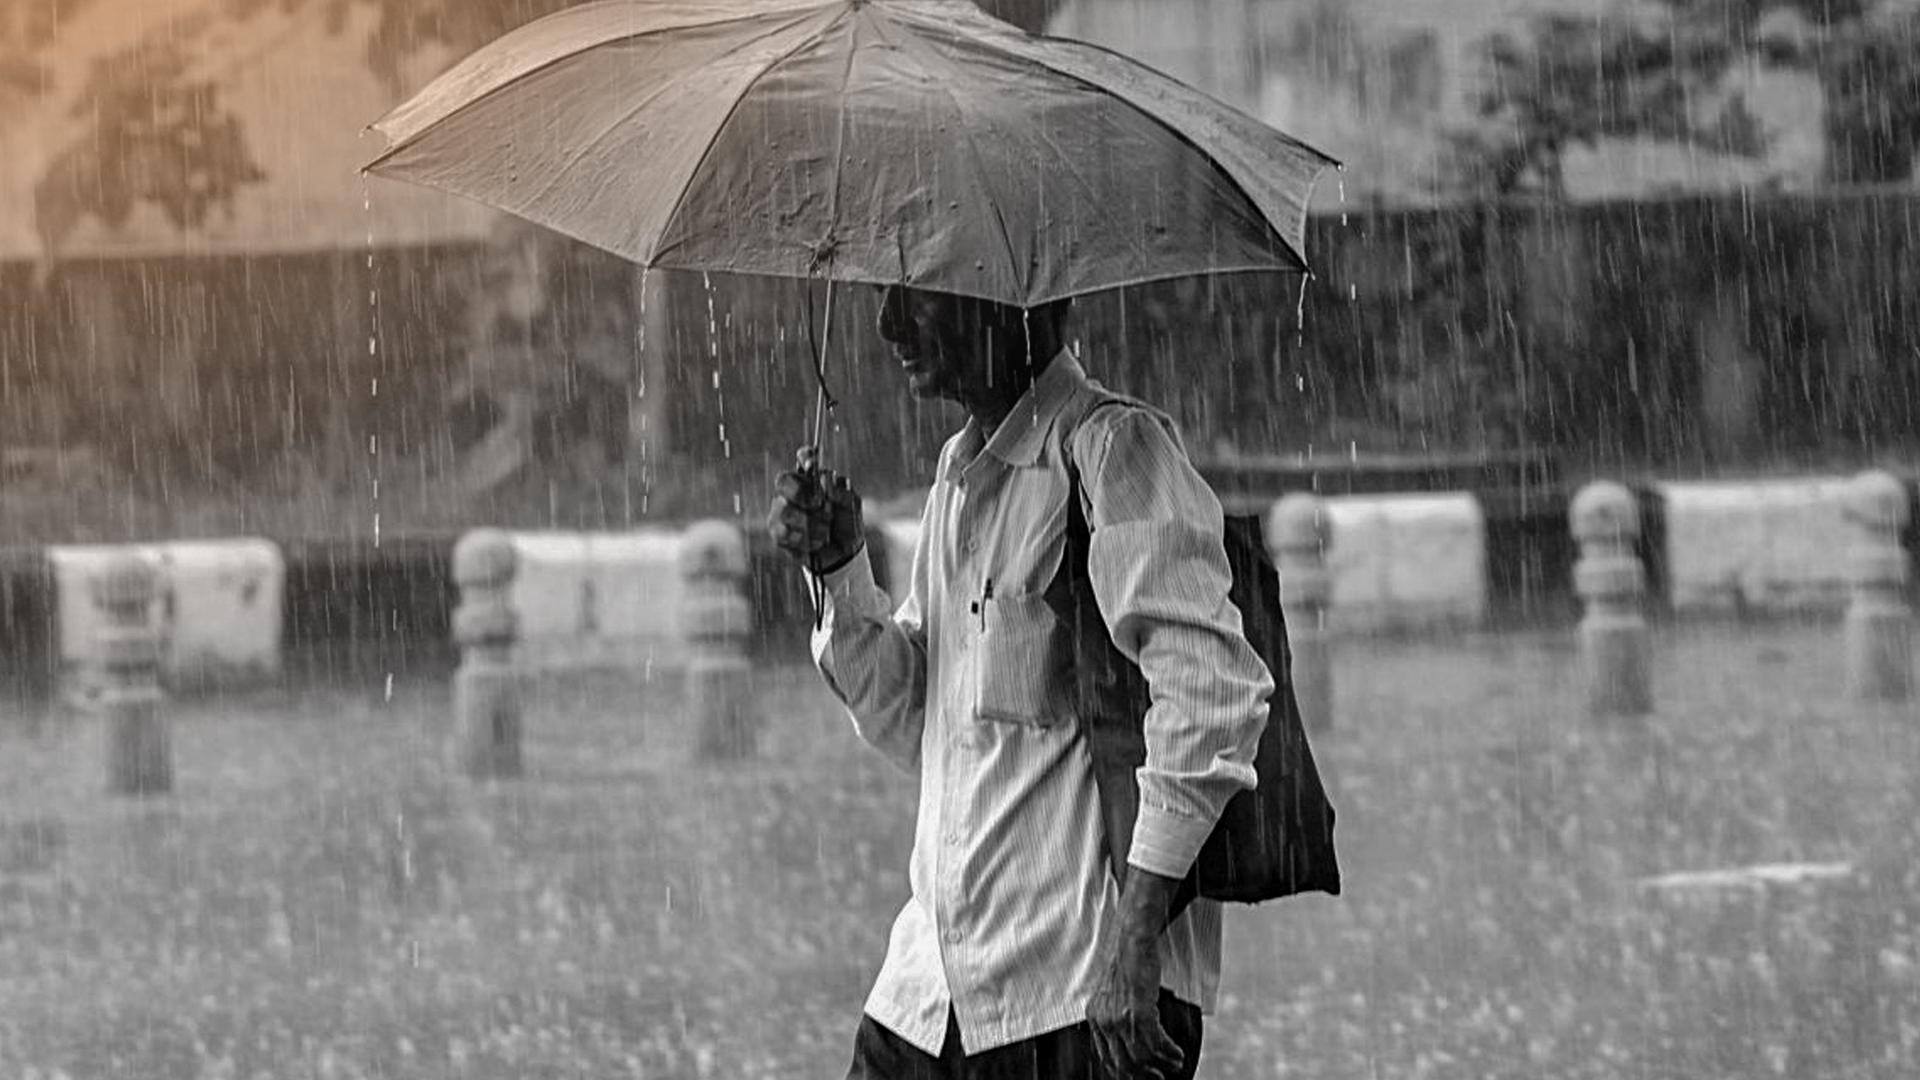 IMD predicts rainfall for several states over next 4 days